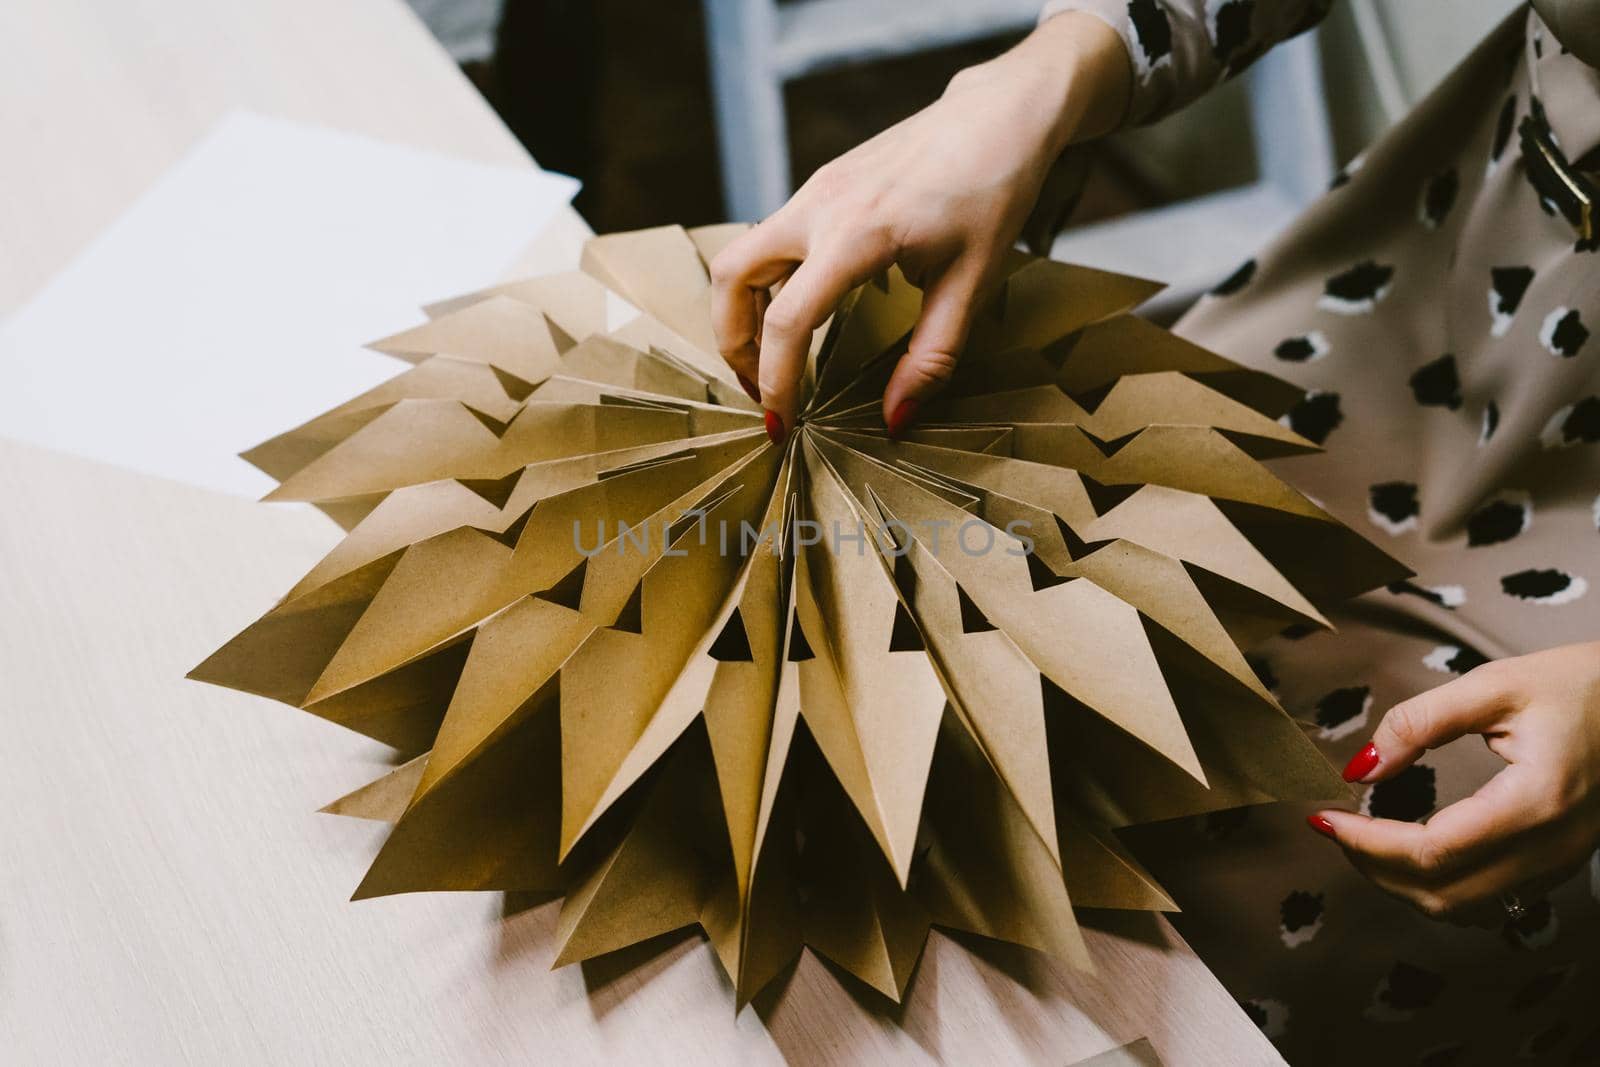 The origami stage. DIY personalized xmas decoration. Creating hand made christmas ornaments. Step by step instructions. Snowflake or three-dimensional star made of kraft paper.